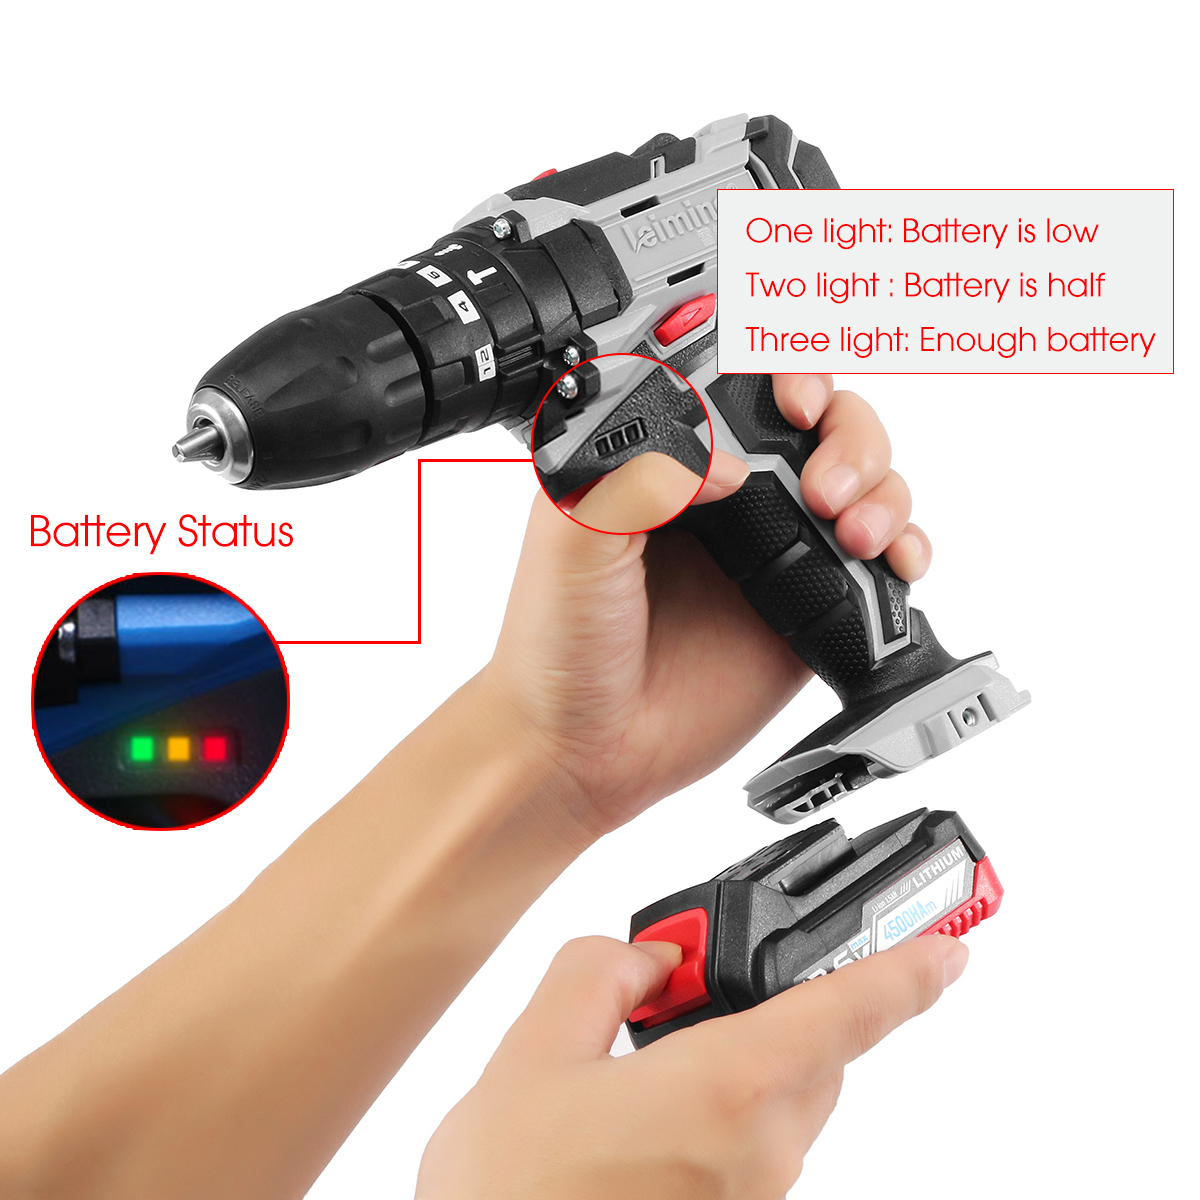 126V-Li-ion-Battery-Electric-Screwdriver-Cordless-Rechargeable-Power-Drill-with-LED-light-1297752-7